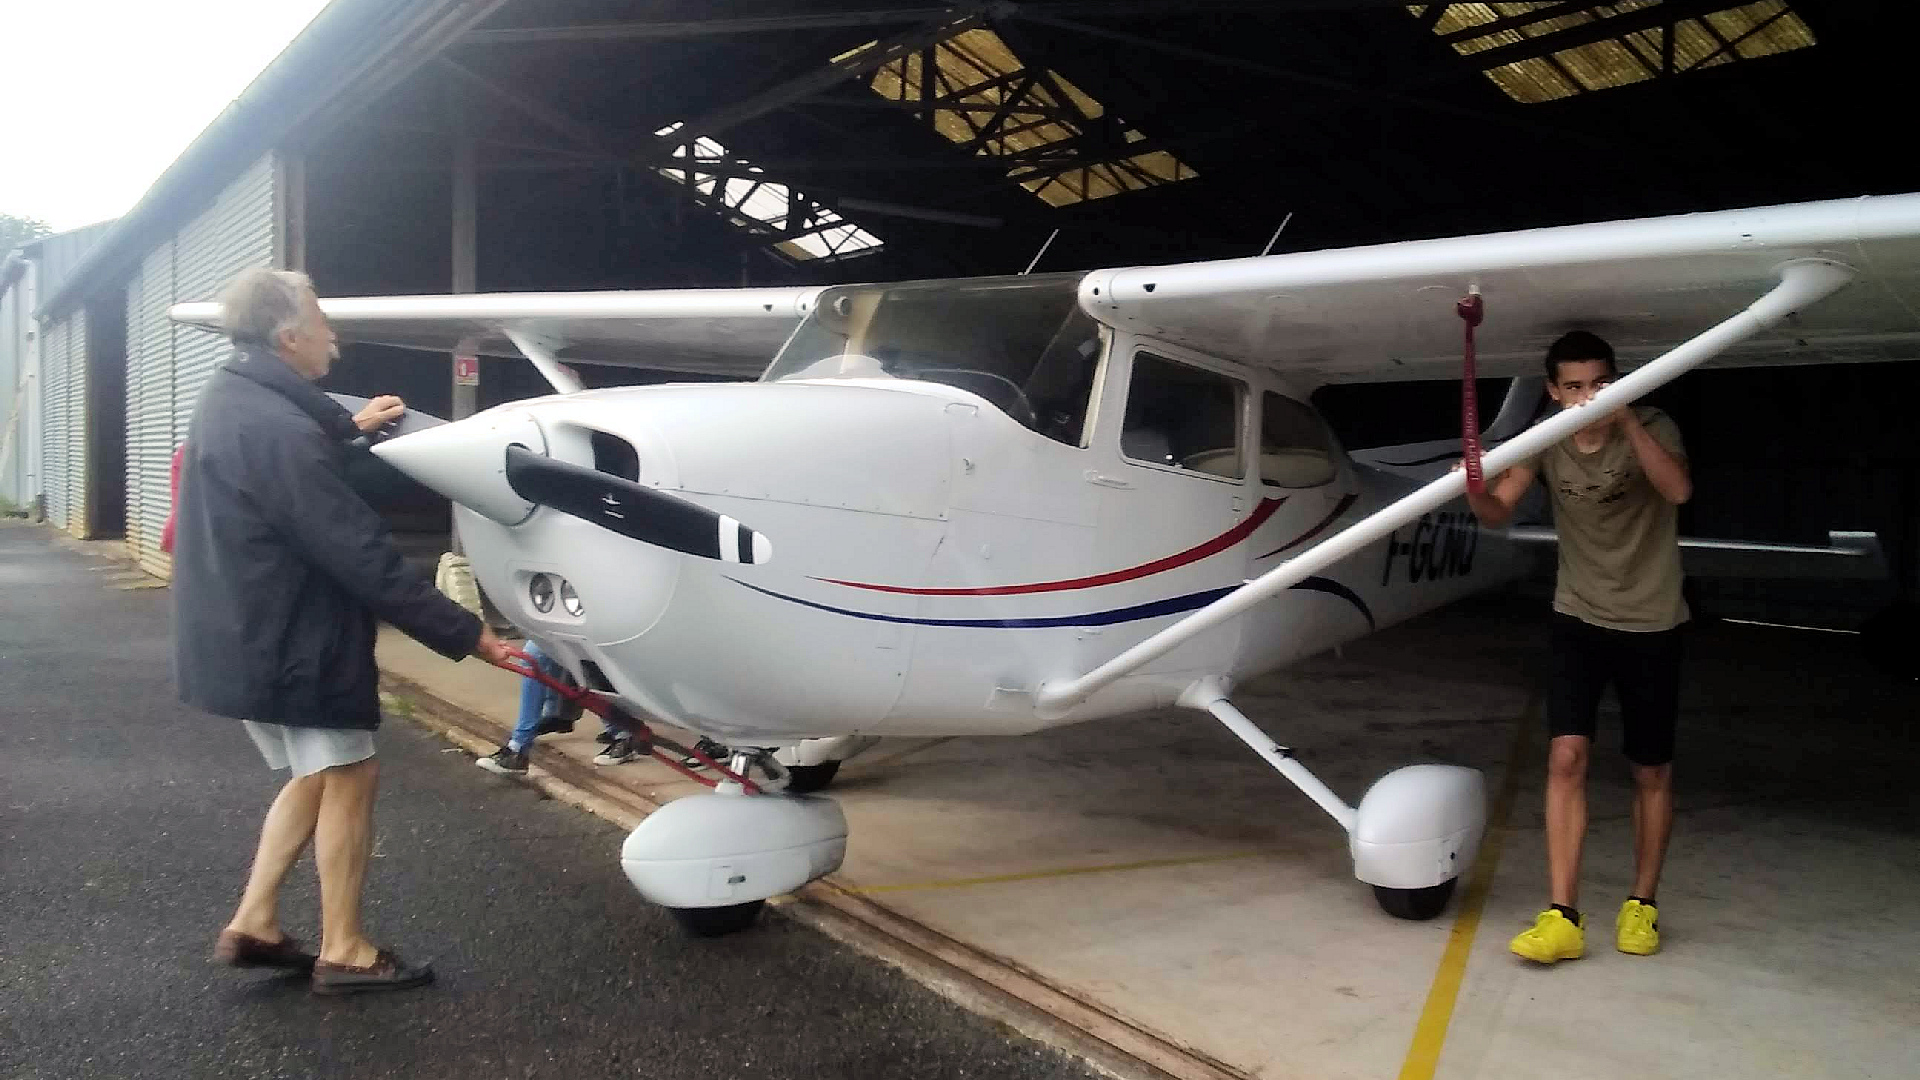 The chief pilot takes the Cessna 172 out of the Saumur Air Club hangar